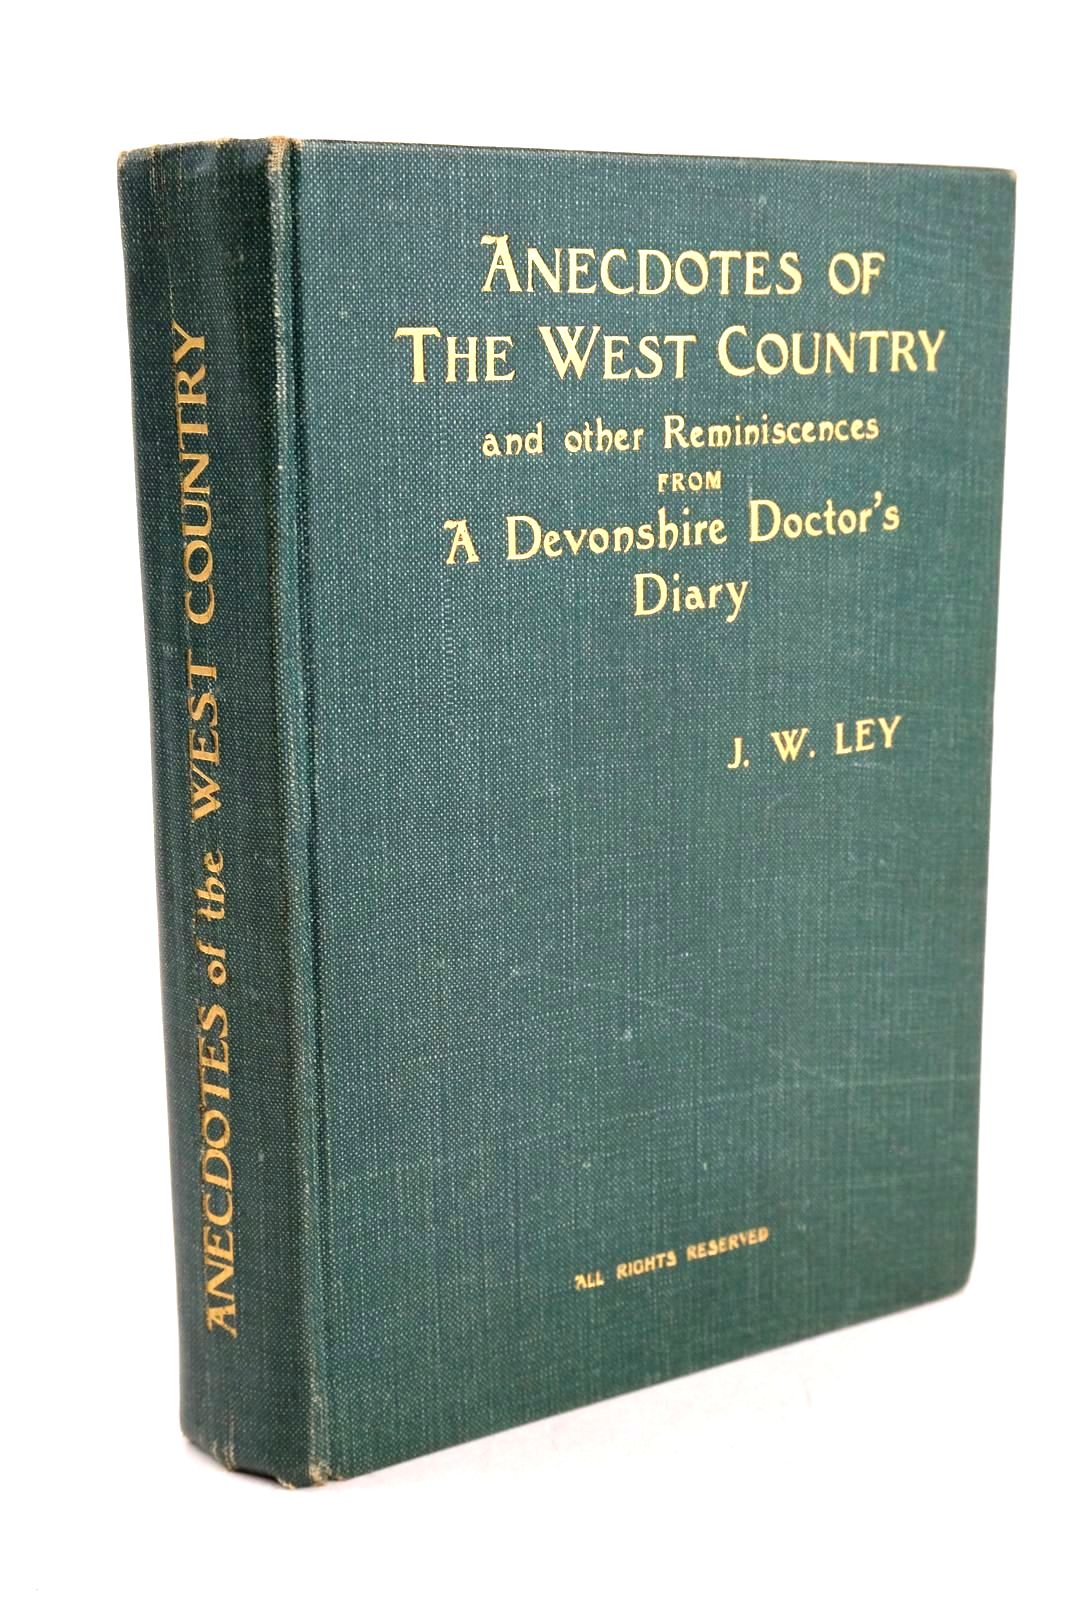 Photo of ANECDOTES OF THE WEST COUNTRY AND OTHER REMINISCENCES FROM A DEVONSHIRE DOCTOR'S DIARY- Stock Number: 1326577